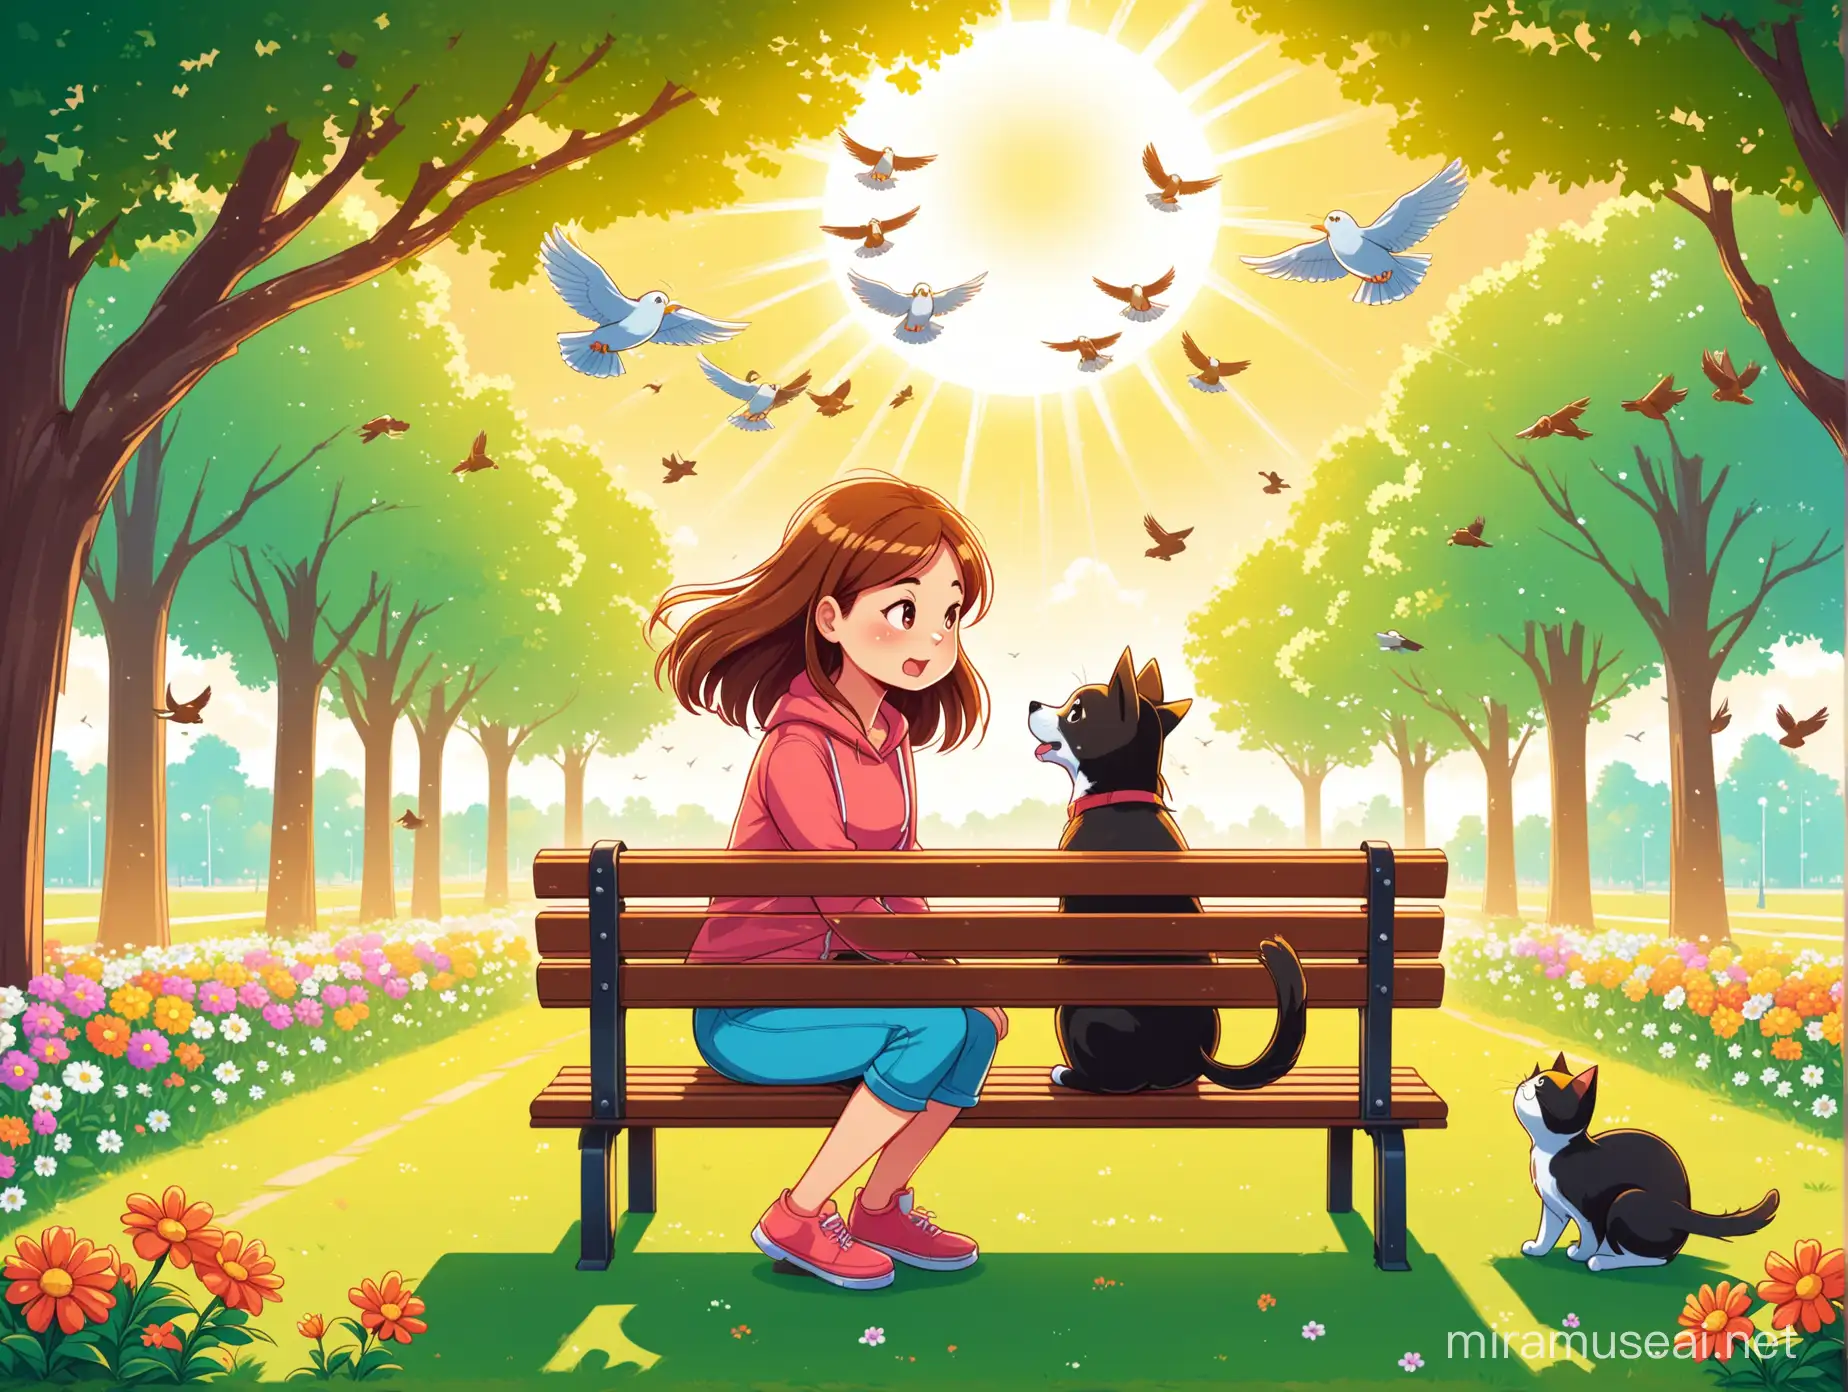 a girl sitting on a bench in a park and her dog is sniffing the bench. Next to the bench two cats are fighting. colorful cartoon style. nice flowers, sun shining, birds flying